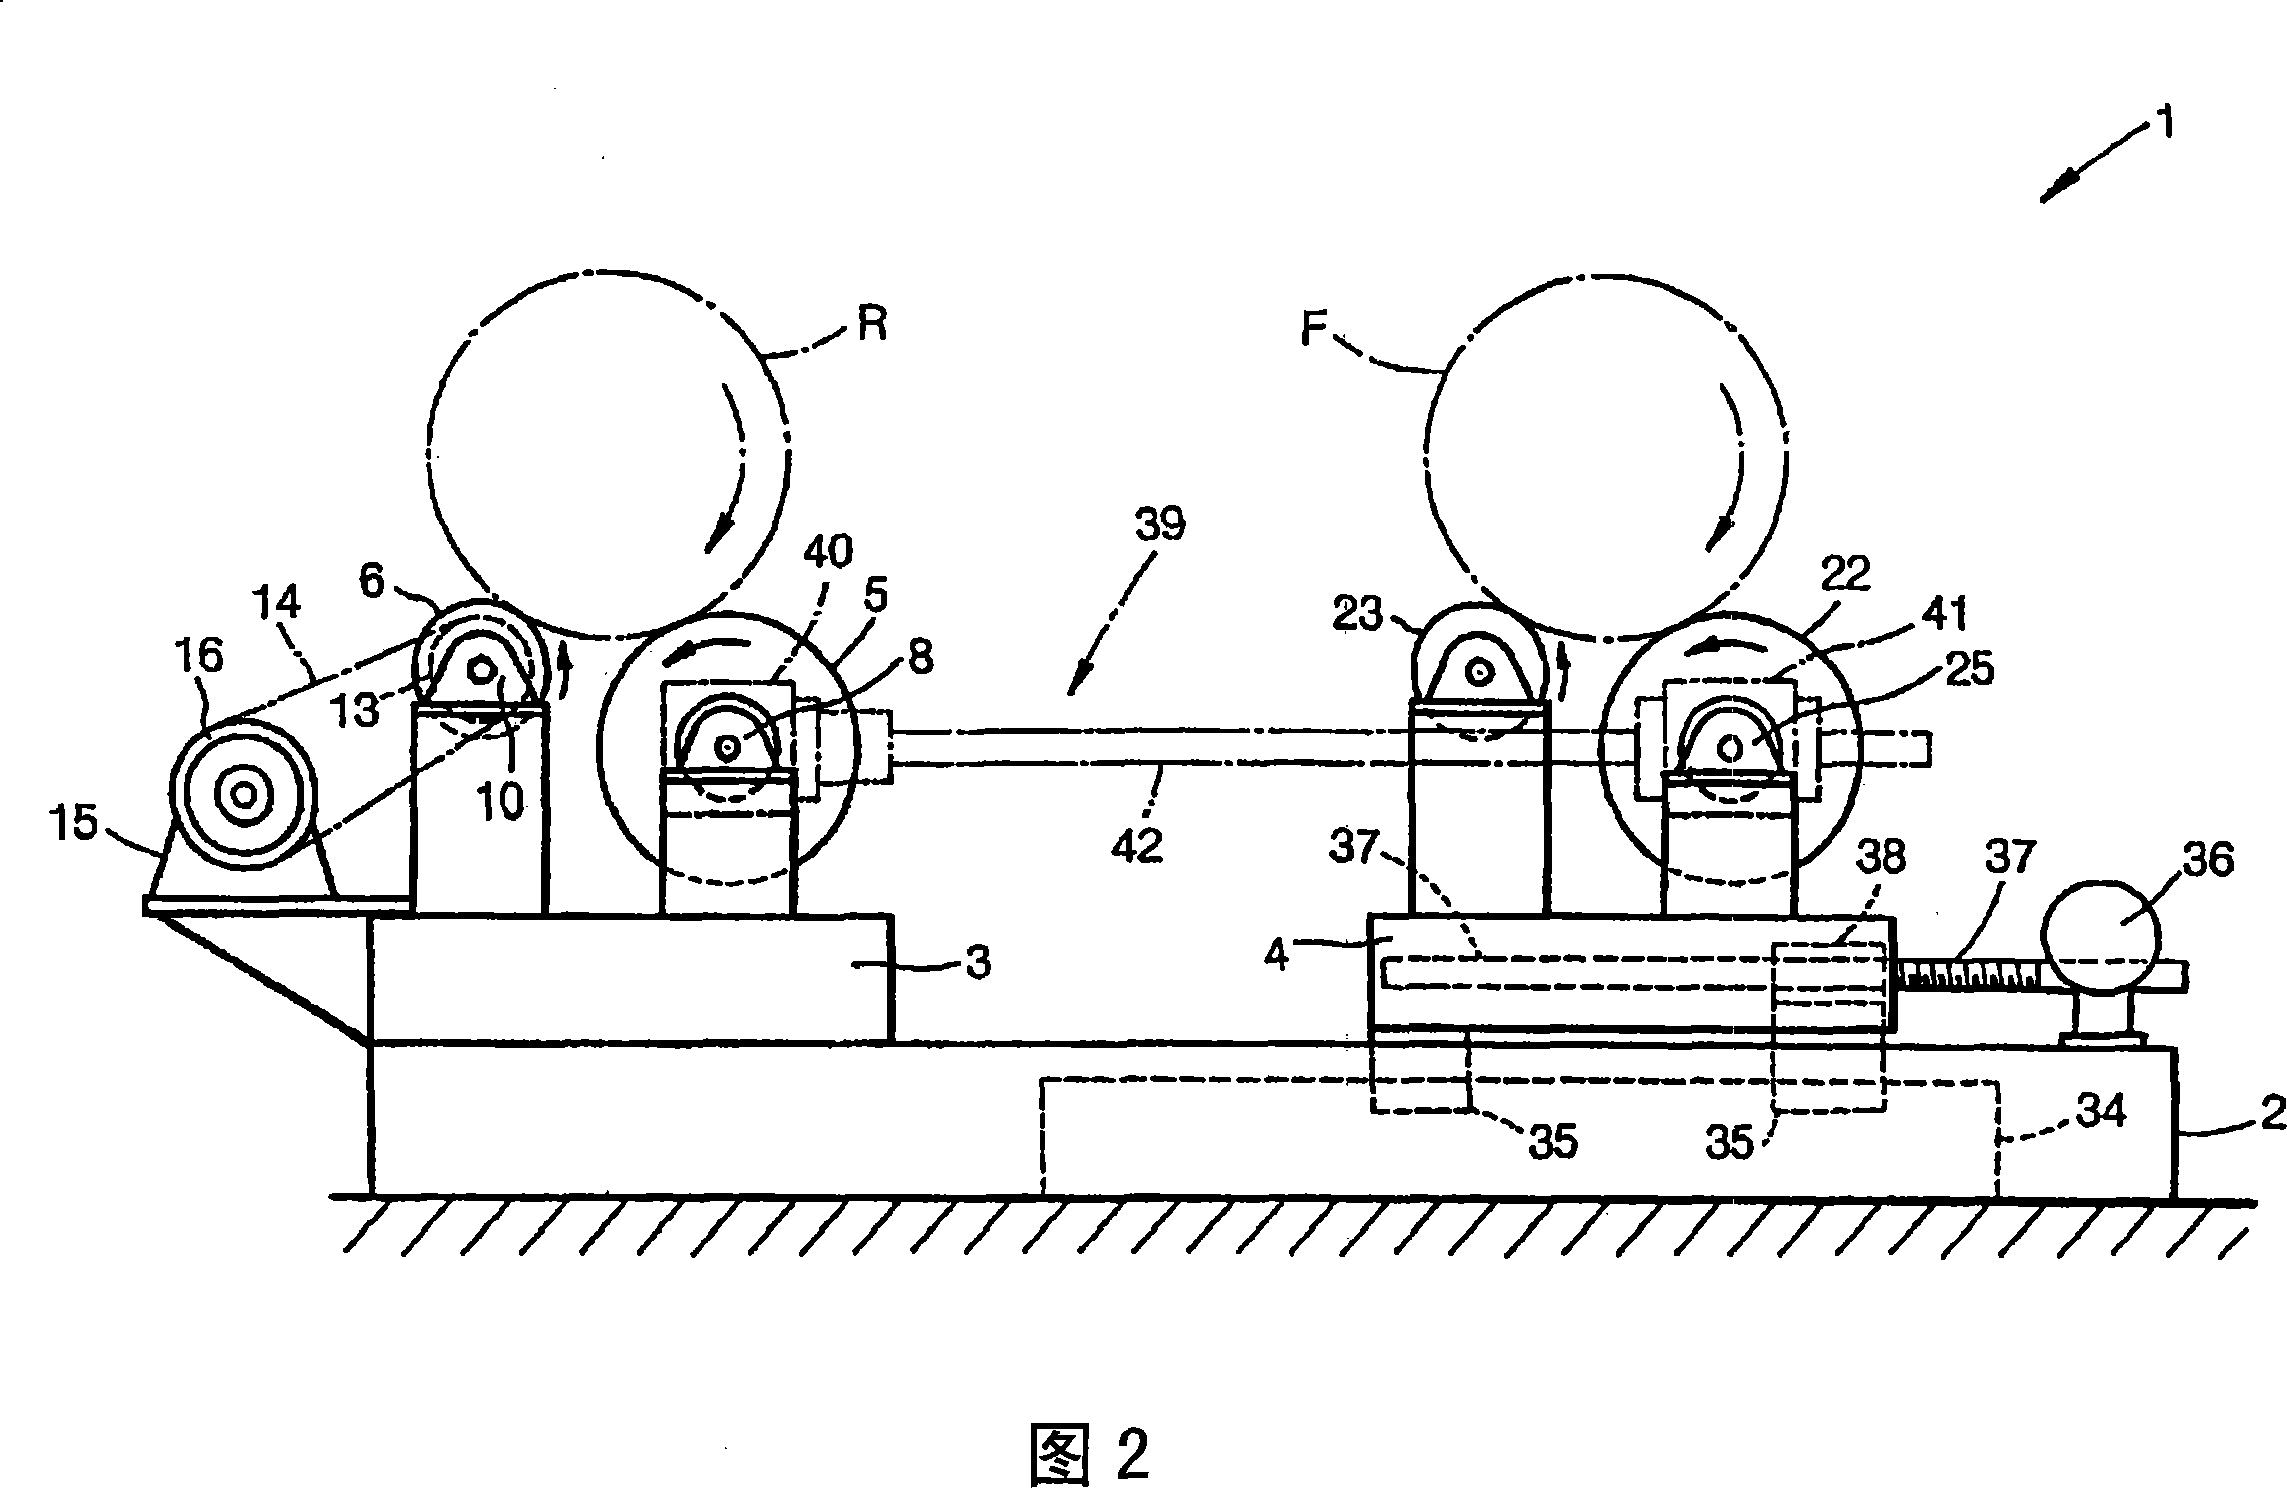 Apparatus and method for inspecting motorcycle